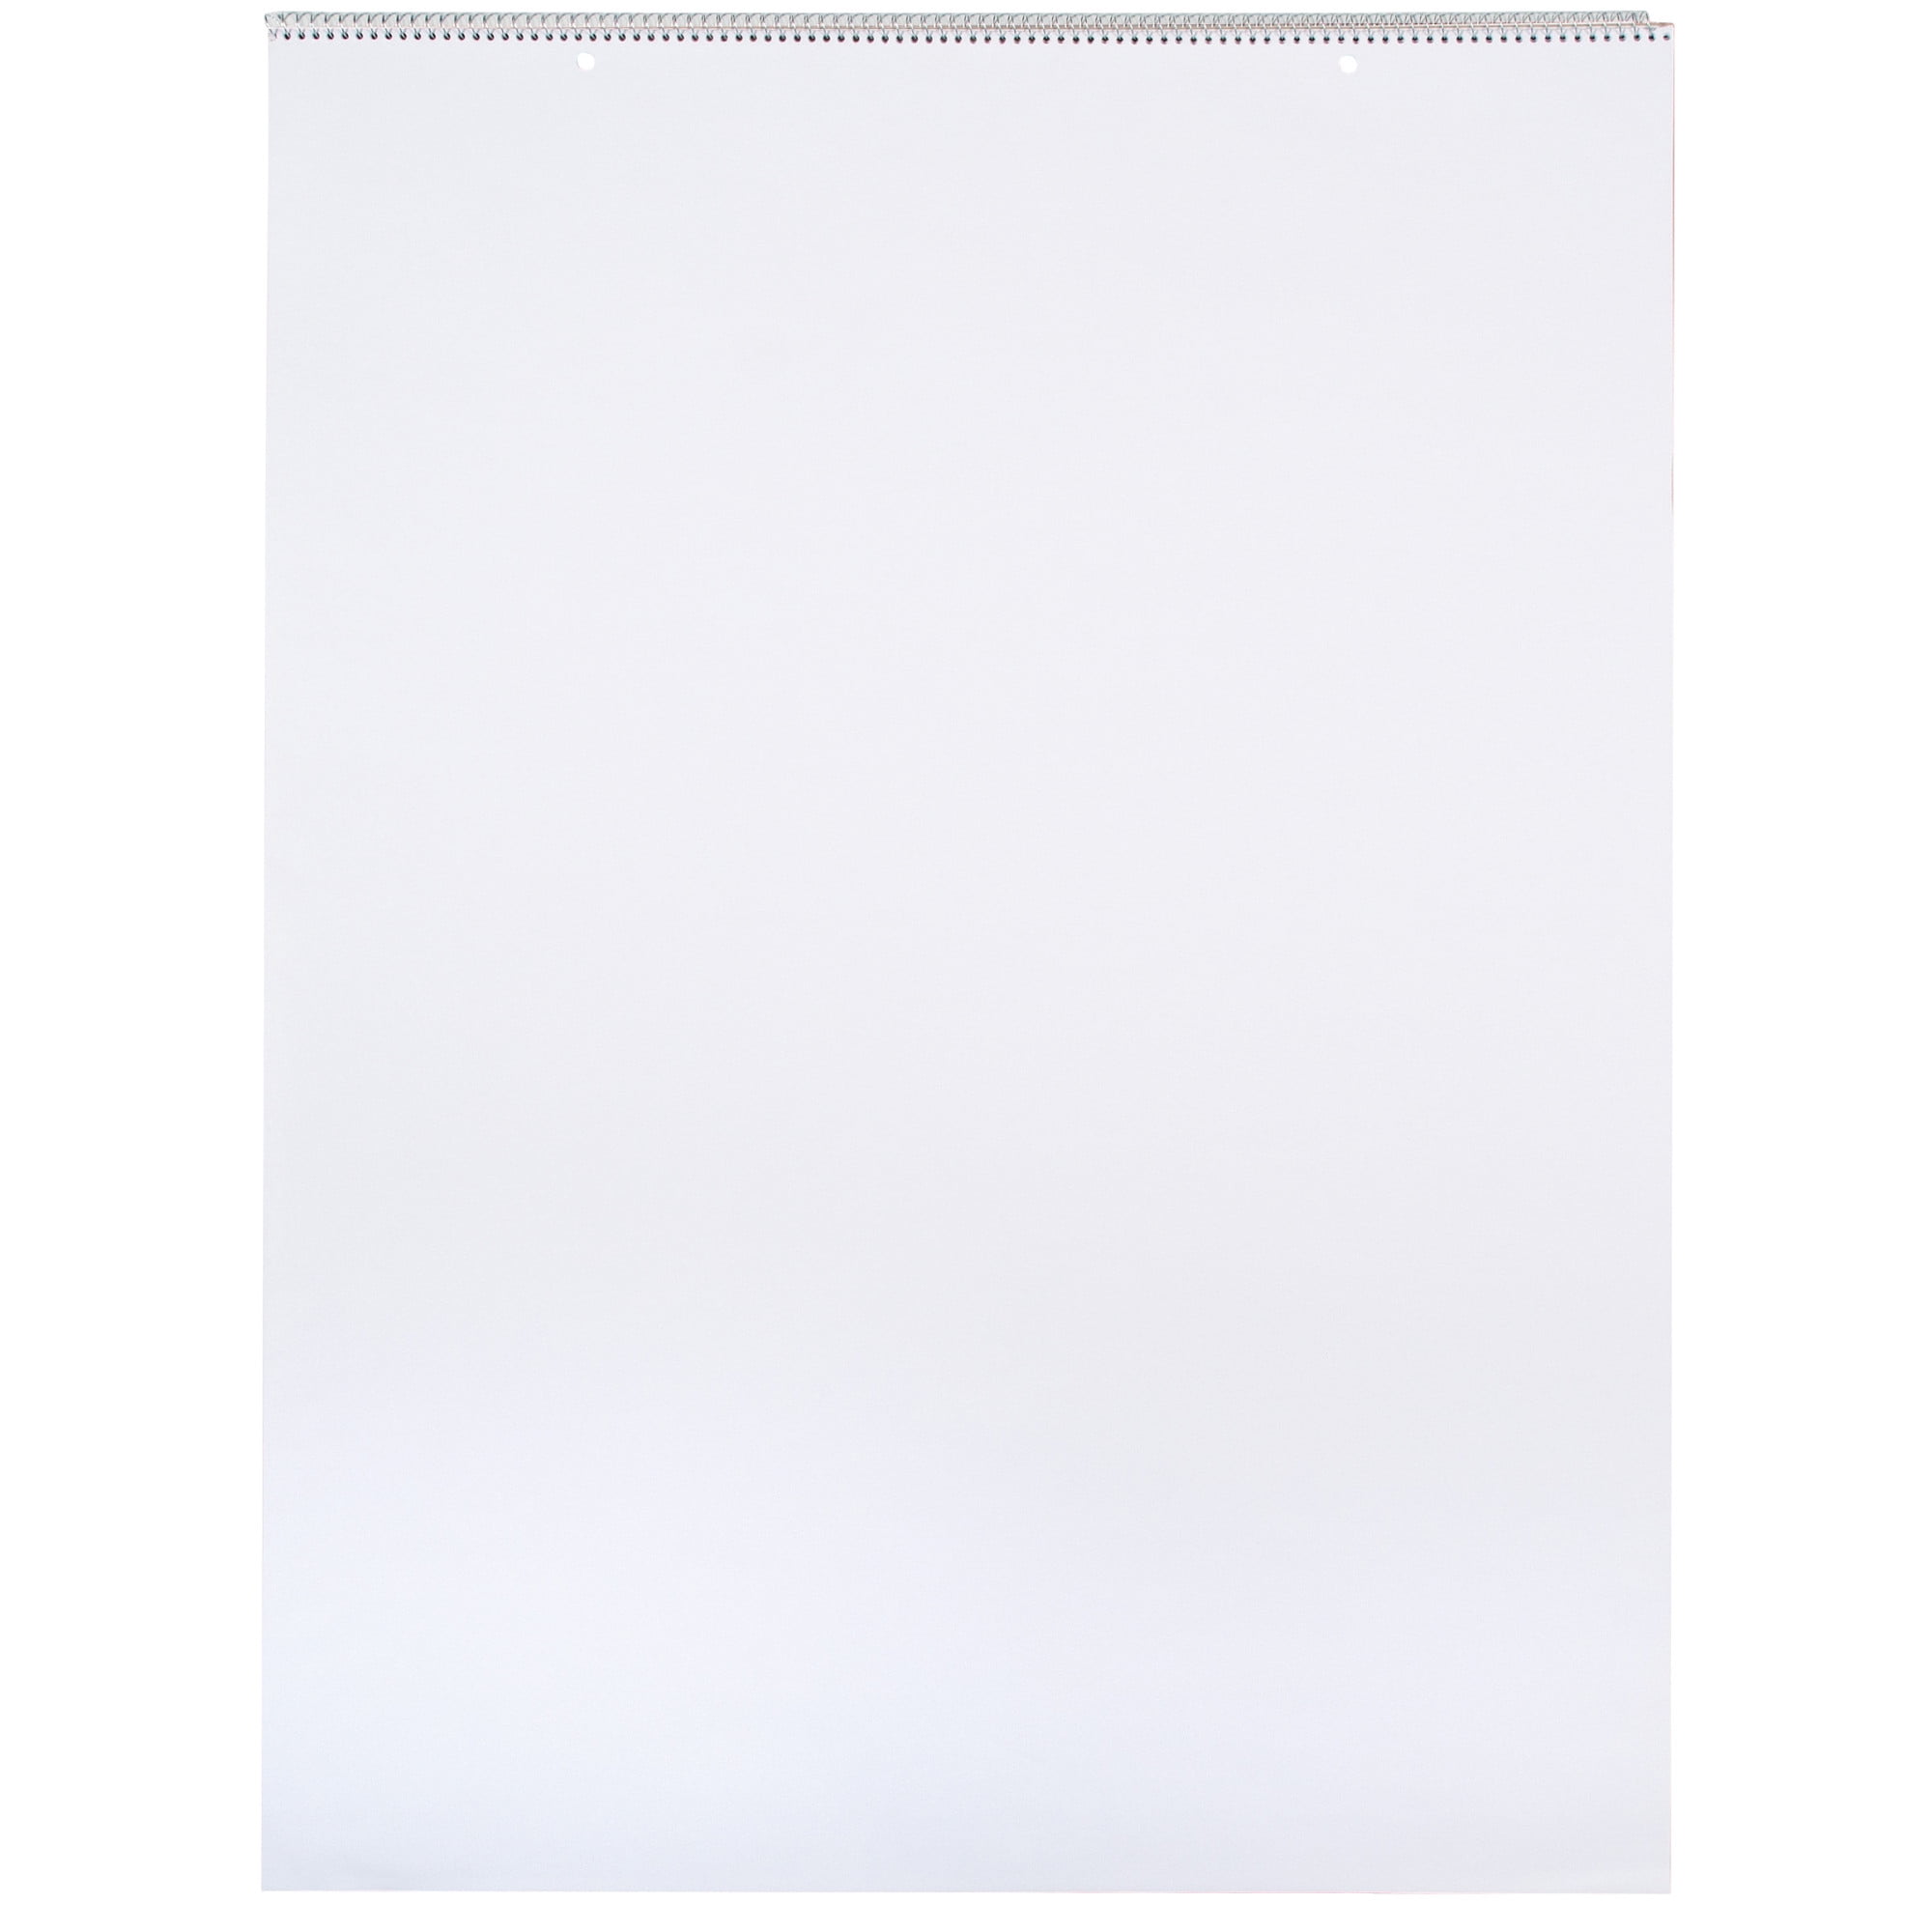 School Smart Chart Paper Pad, 32 x 24 Inches, Unruled, 25 Sheets